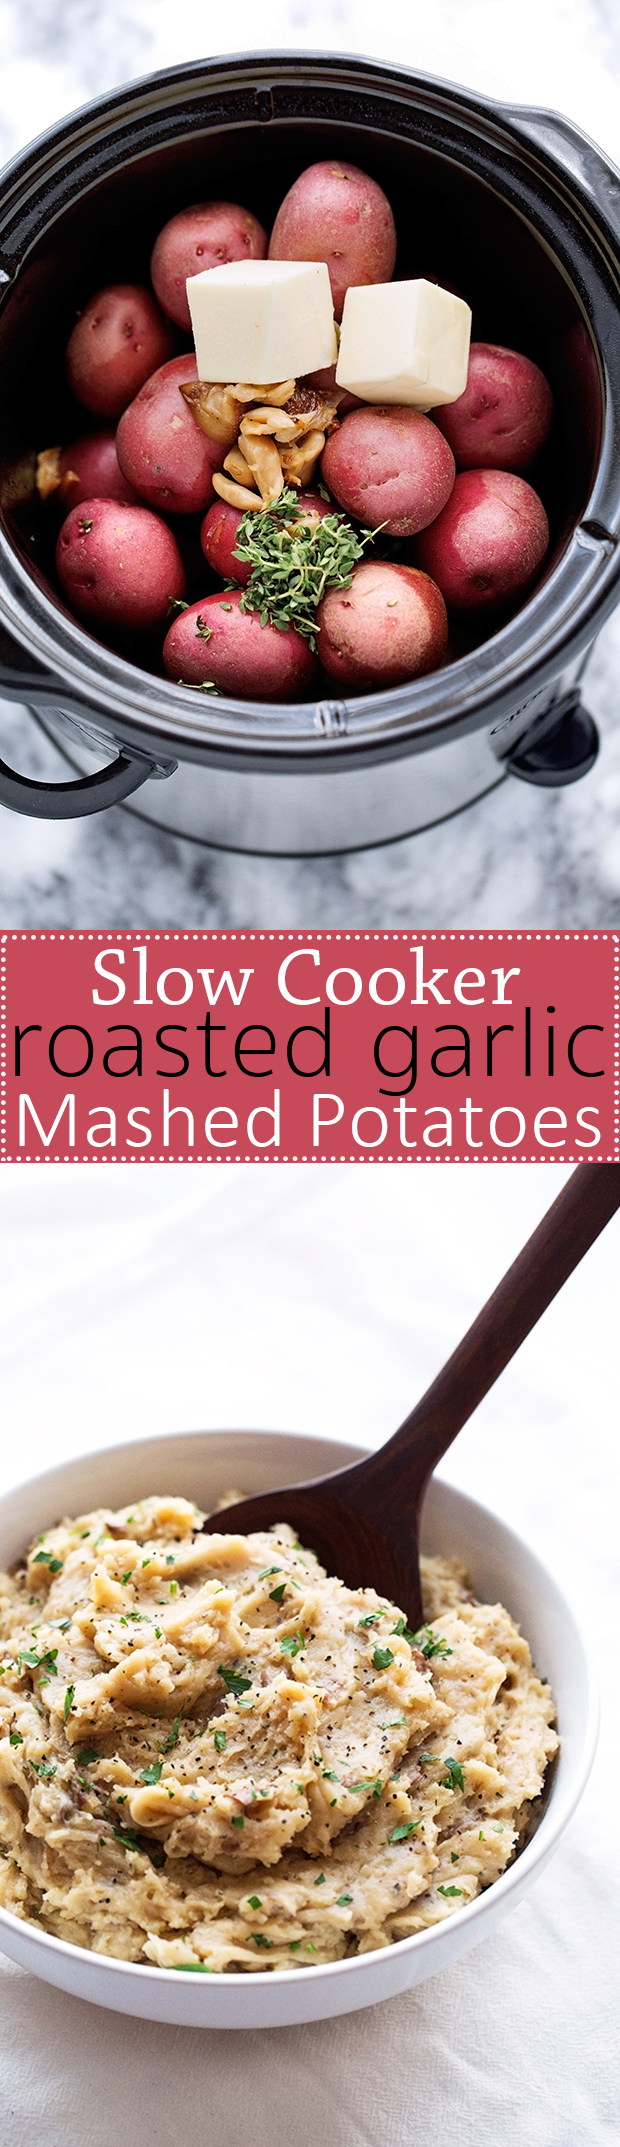 Roasted Garlic Mashed Potatoes - Learn how to make roasted garlic mashed potatoes in the slow cooker! Perfect for Thanksgiving! #slowcooker #mashedpotatoes #crockpot #roastedgarlic | Littlespicejar.com